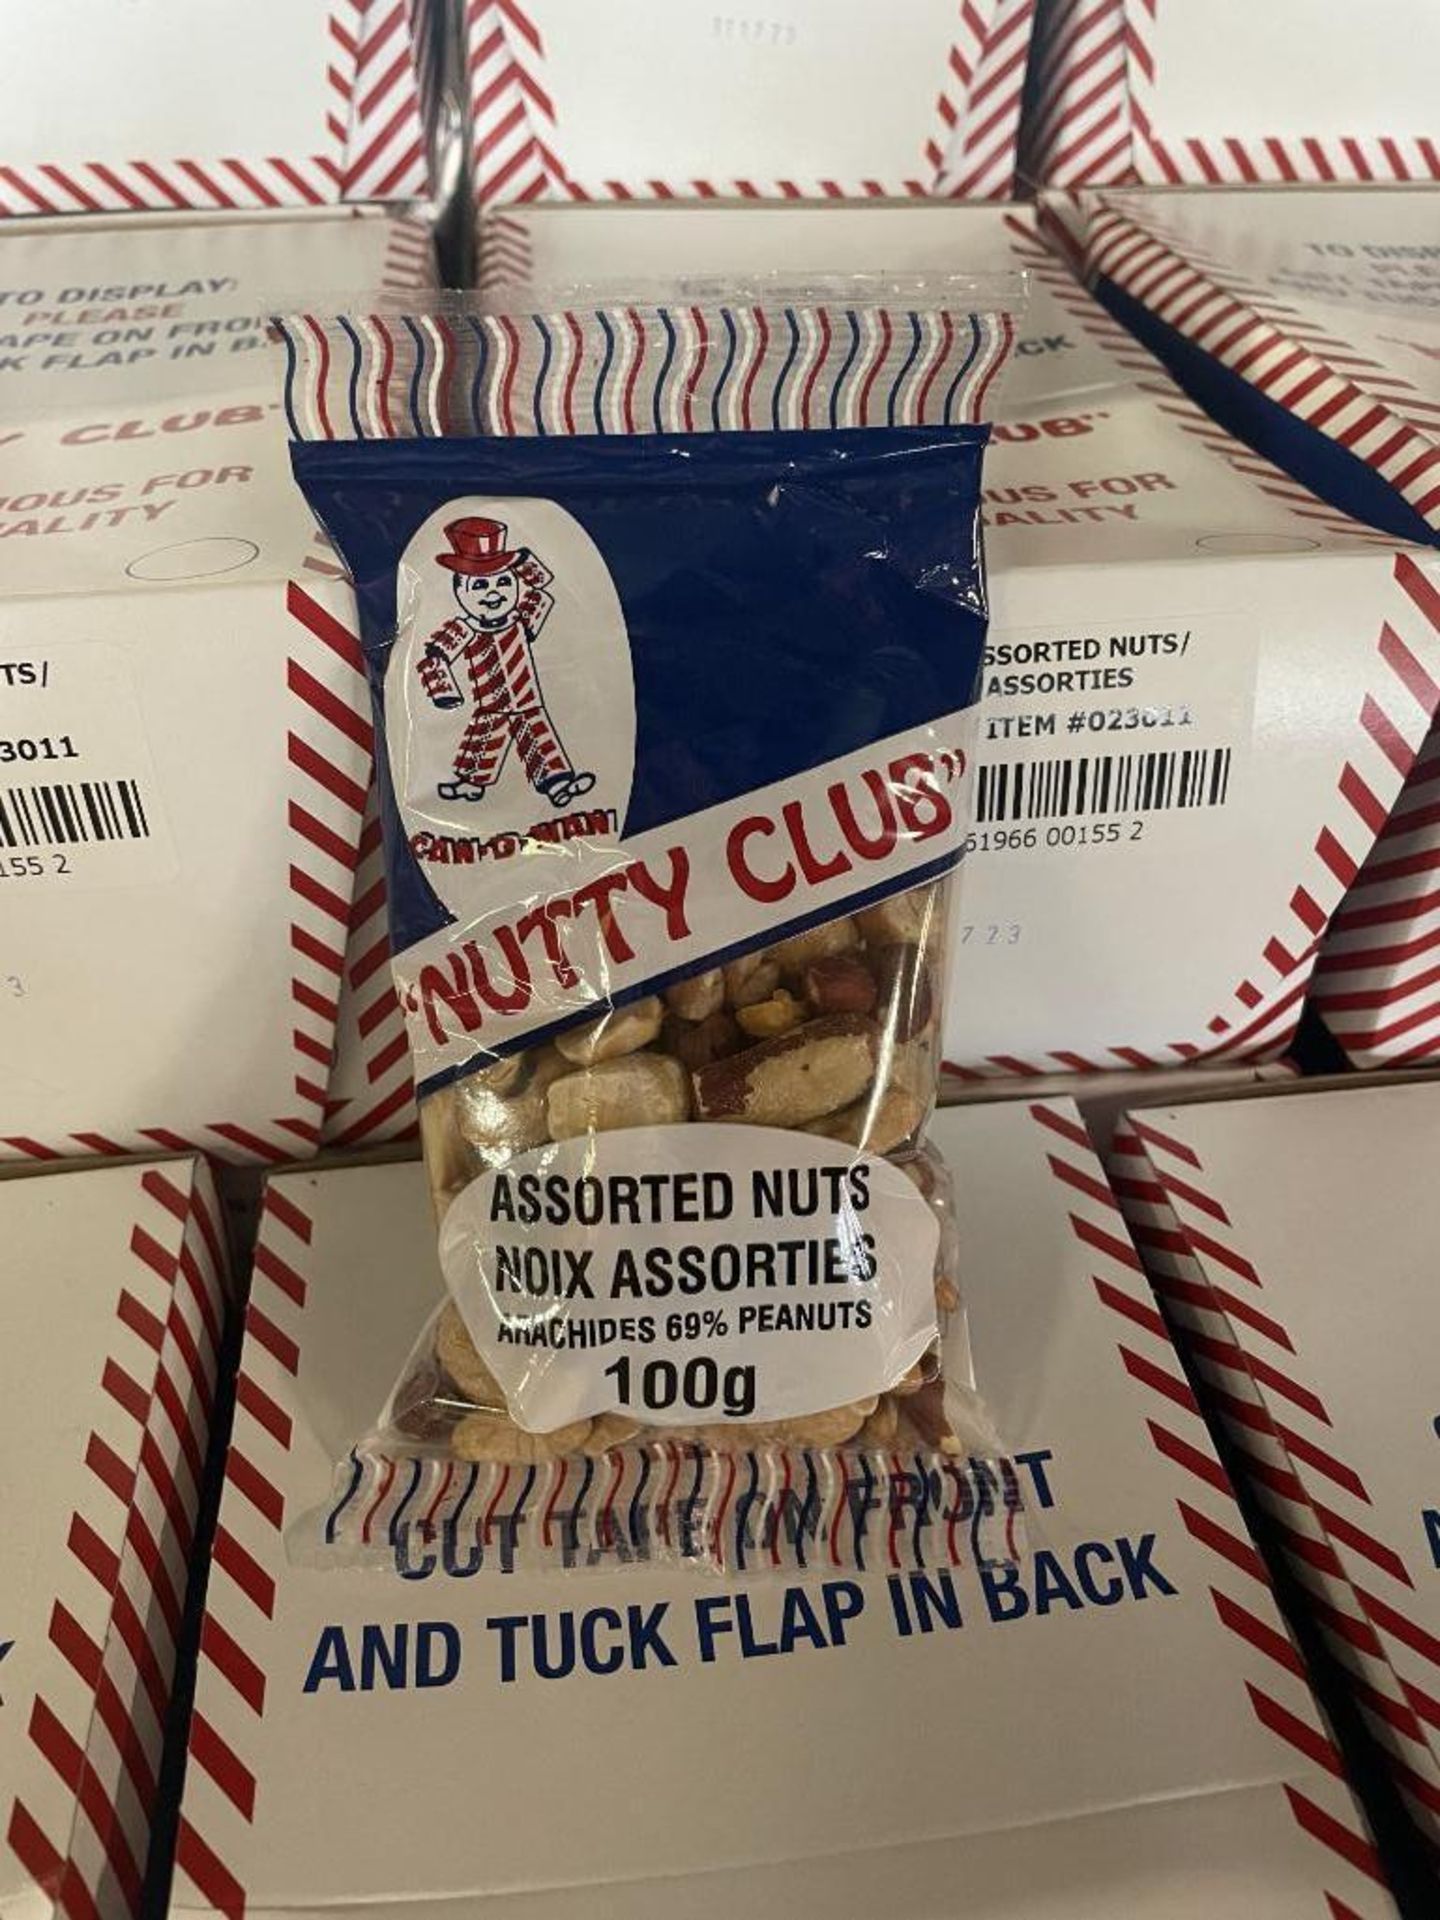 (23) BOXES OF NUTTY CLUB BRIDGE ASSORTED NUTS, 12/100G PER BOX - Image 2 of 4